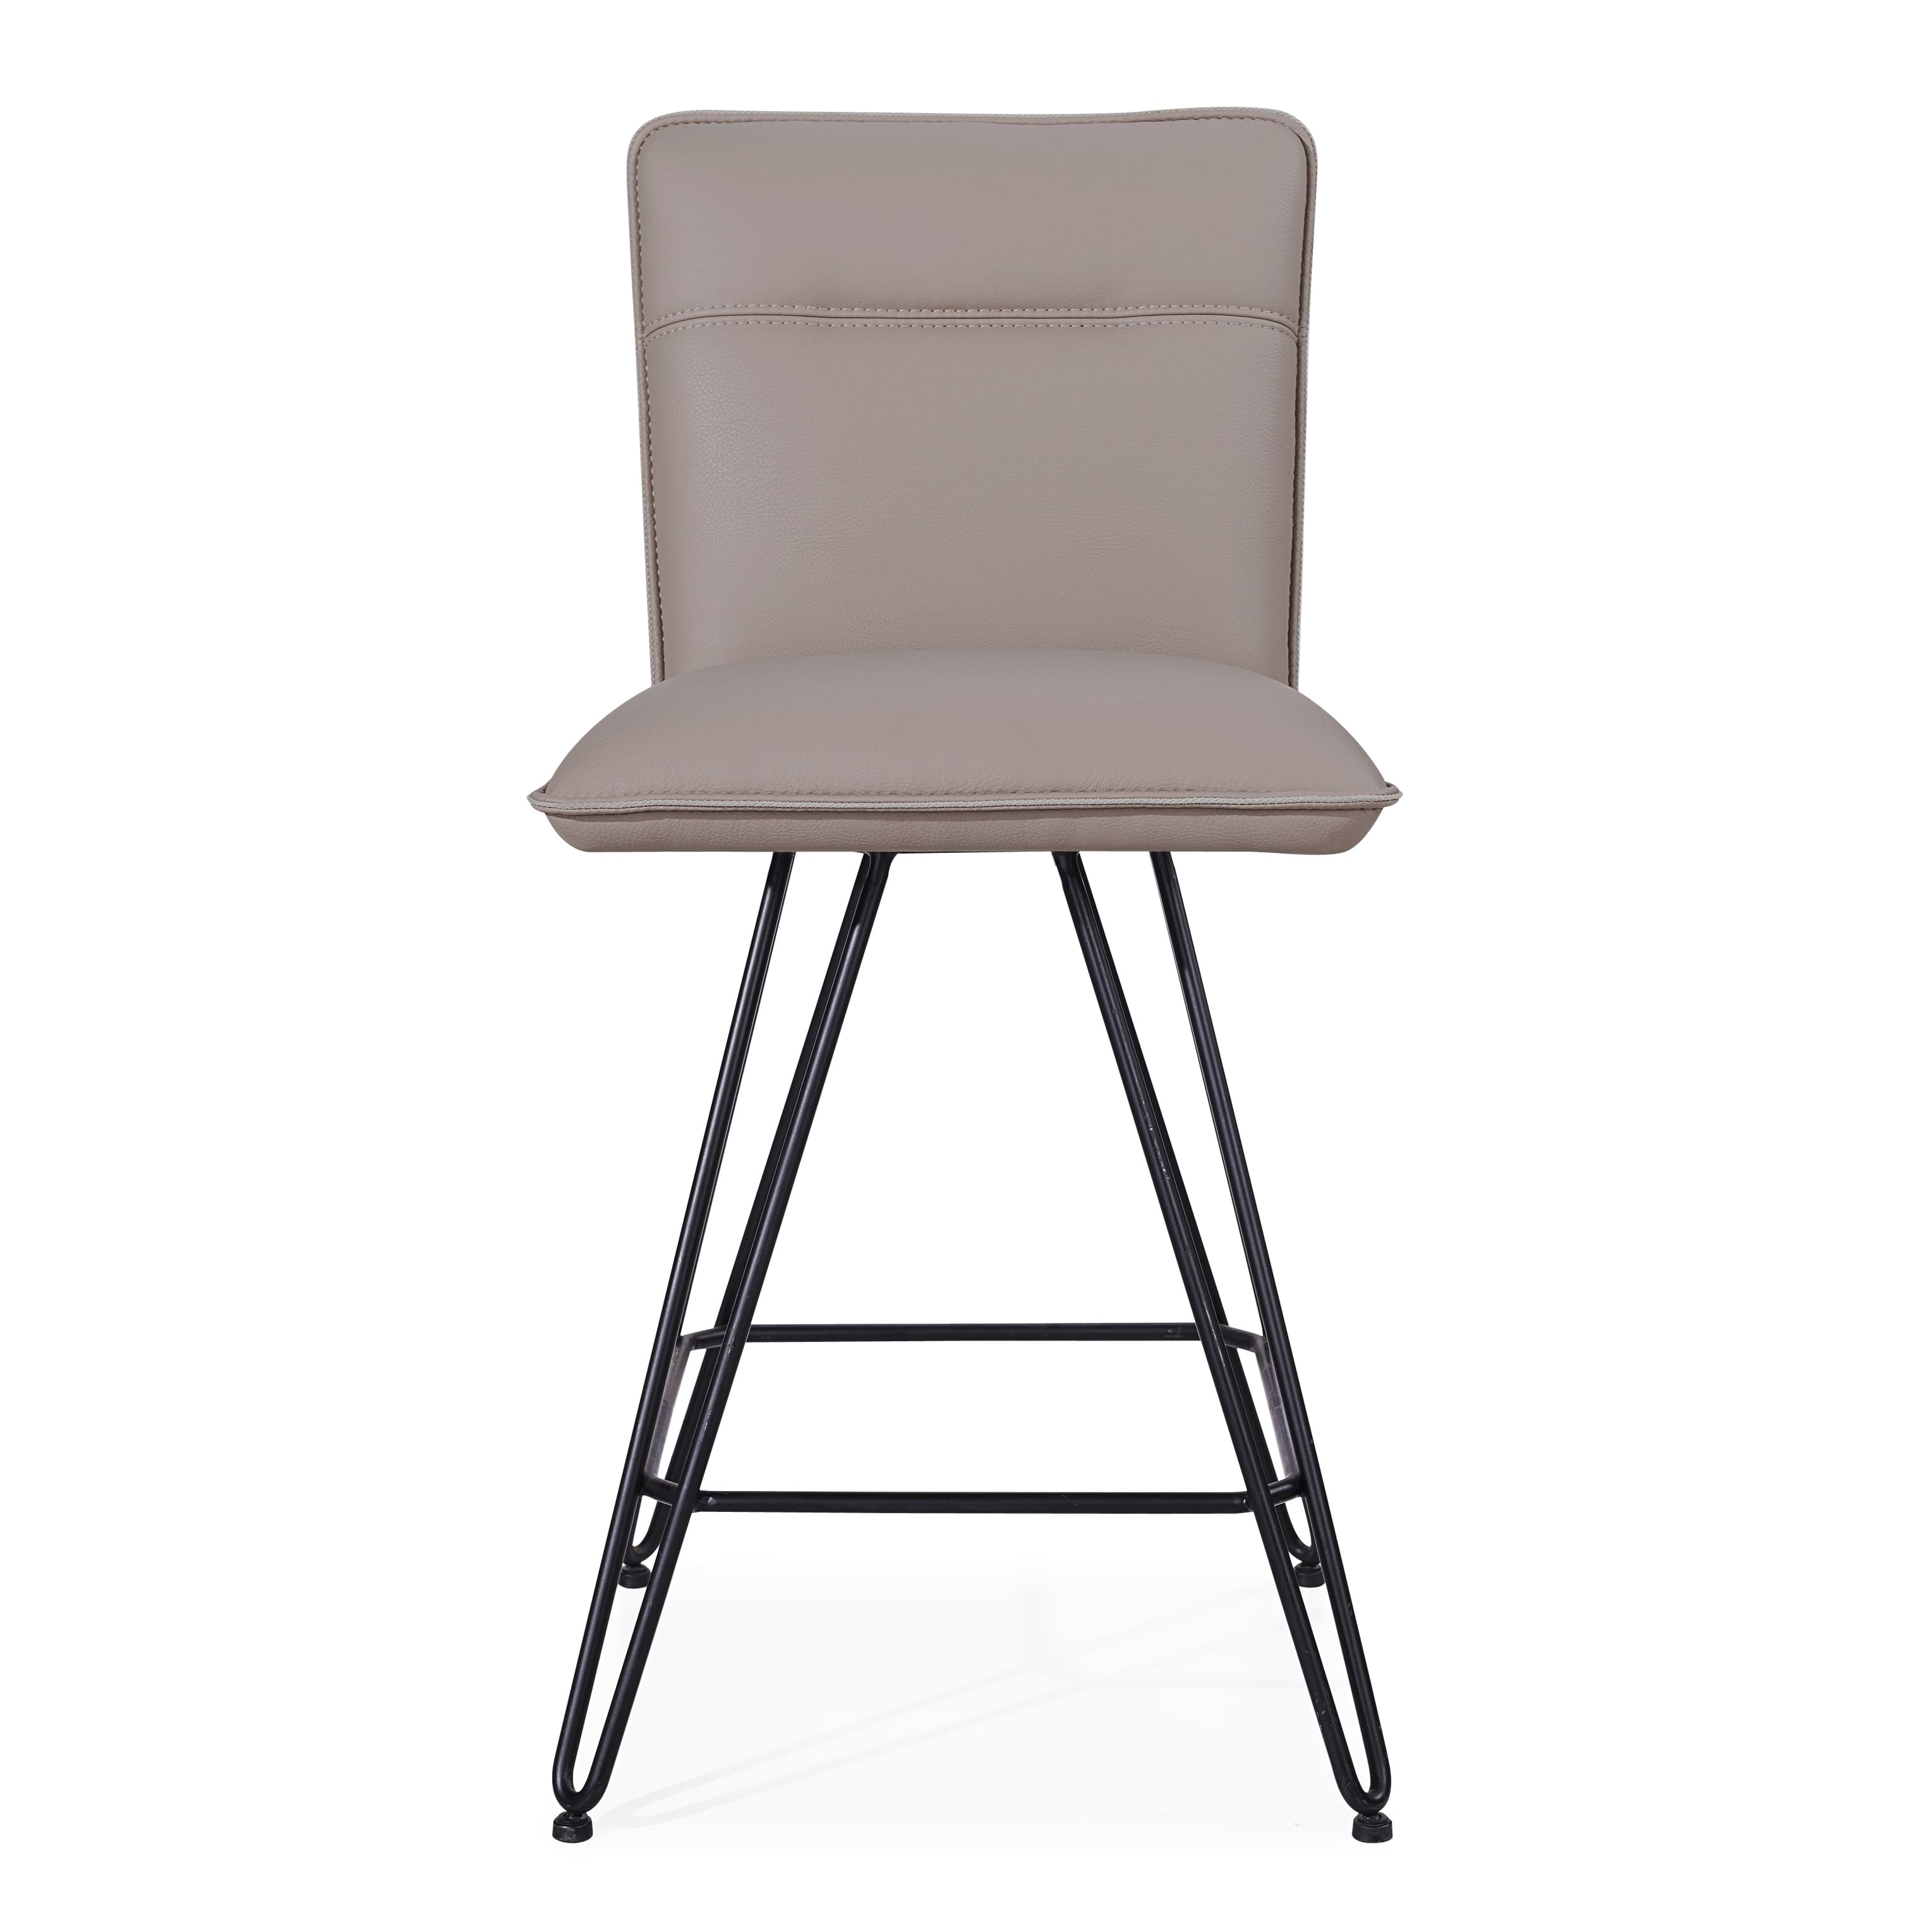 Demi Hairpin Leg Swivel Counter Stool in Taupe - Bed Bath & Beyond ...